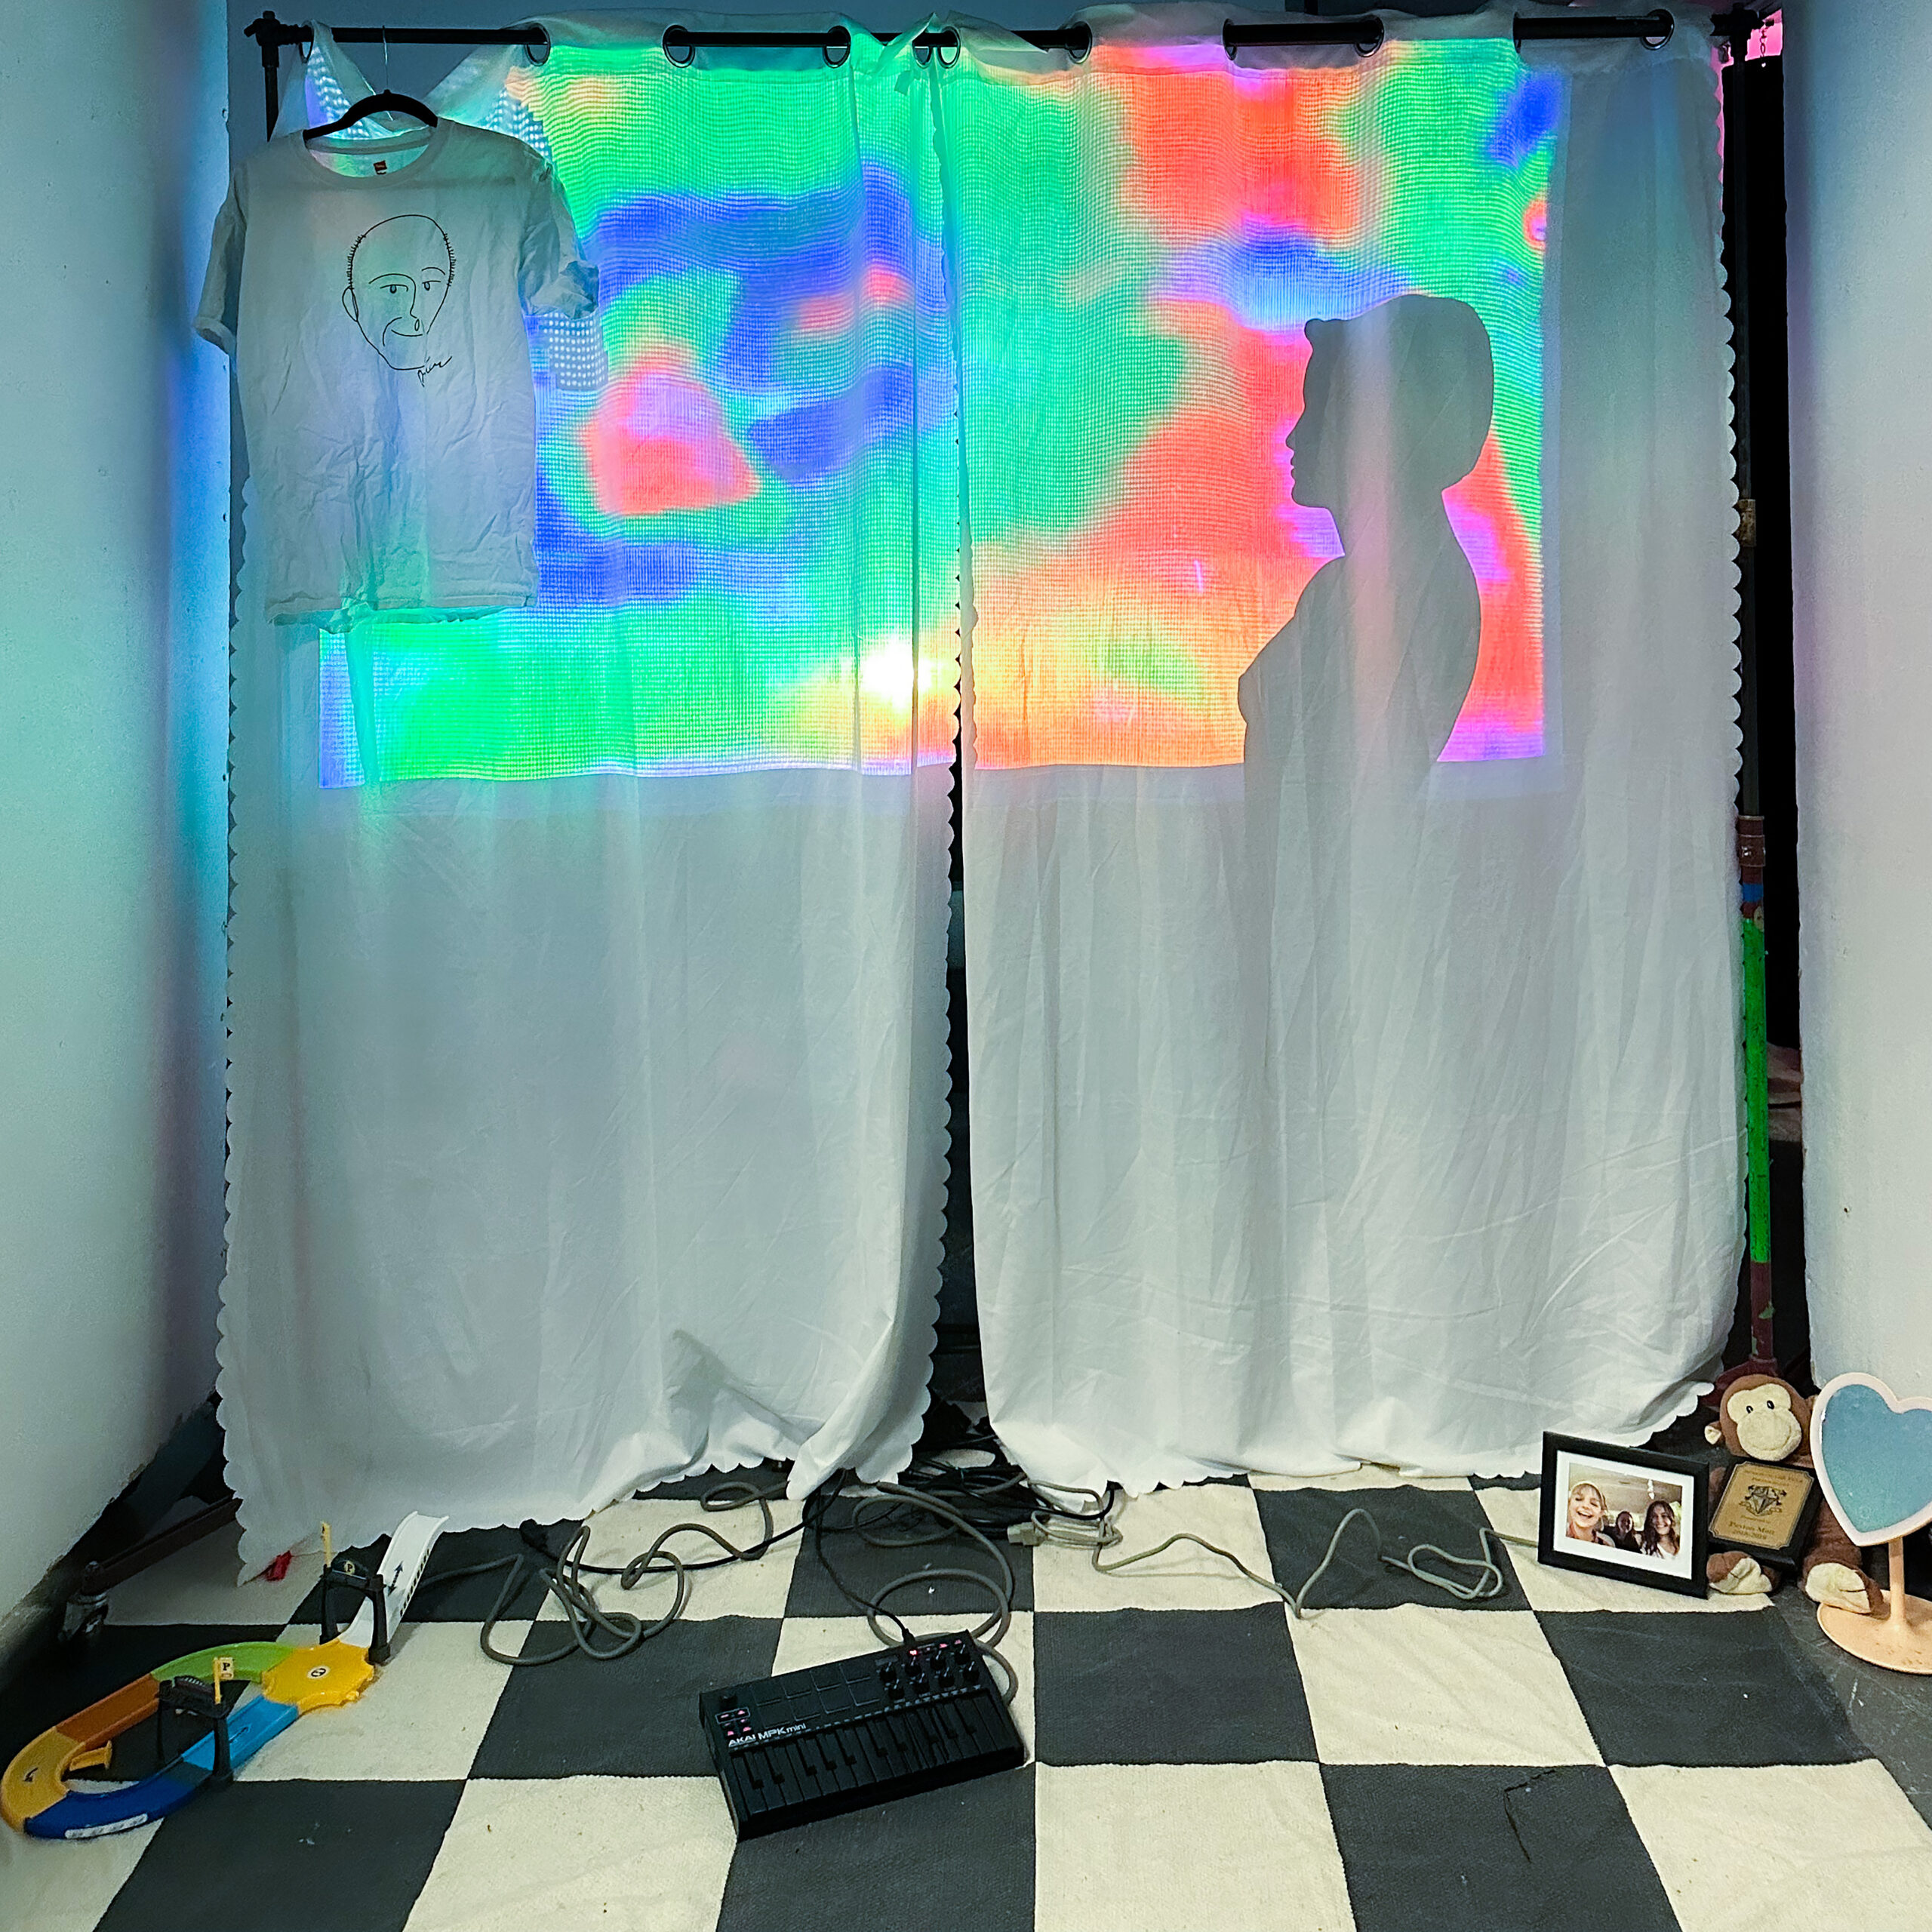 interactive installation with a projection through white curtains. there is a checkered rug with personal items on top (monkey plush, framed photo, heart shaped mirror, midi keyboard, kids toys, exposed wires)